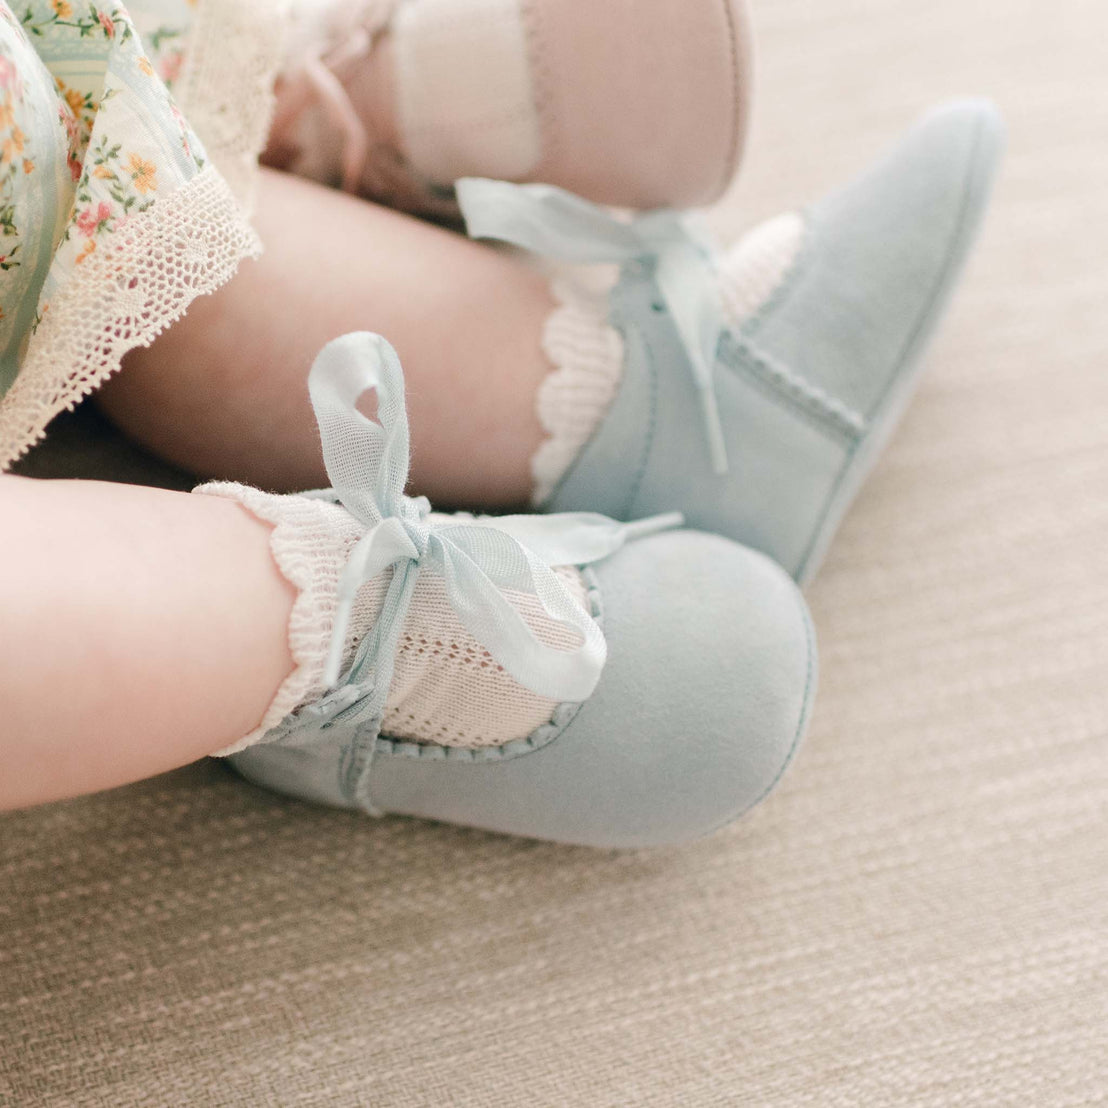 Baby girl wearing the "sky blue" color Eloise Suede Tie Mary Janes. These shoes are made with super soft suede with tie detail closures. 